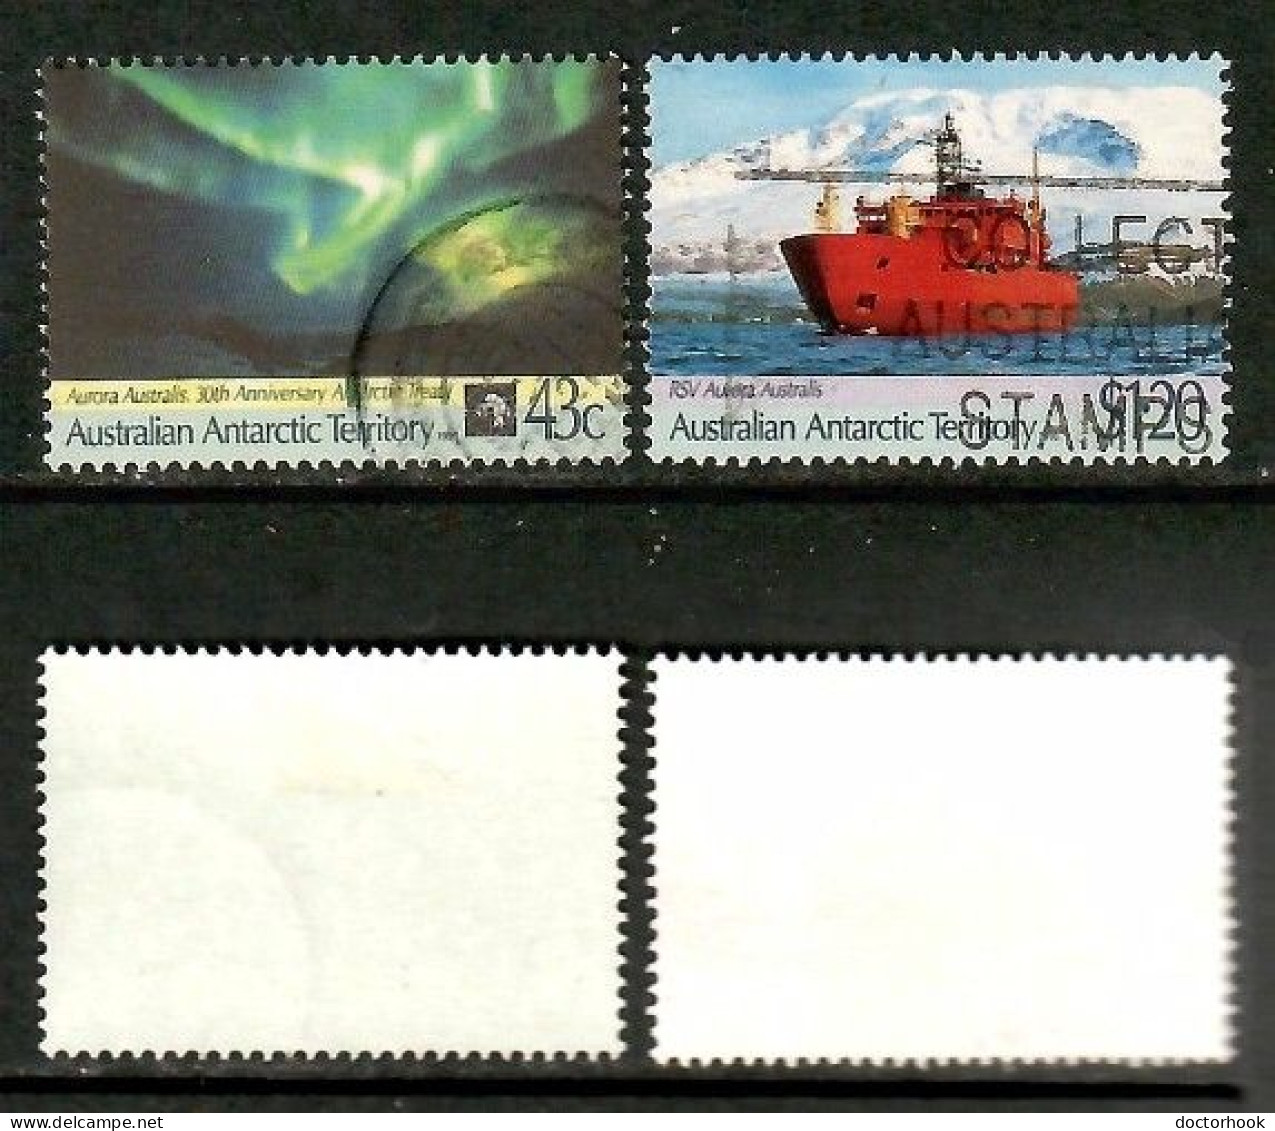 AUSTRALIAN ANTARCTIC TERRITORY   Scott # L 81-2 USED (CONDITION AS PER SCAN) (Stamp Scan # 1008-7) - Oblitérés